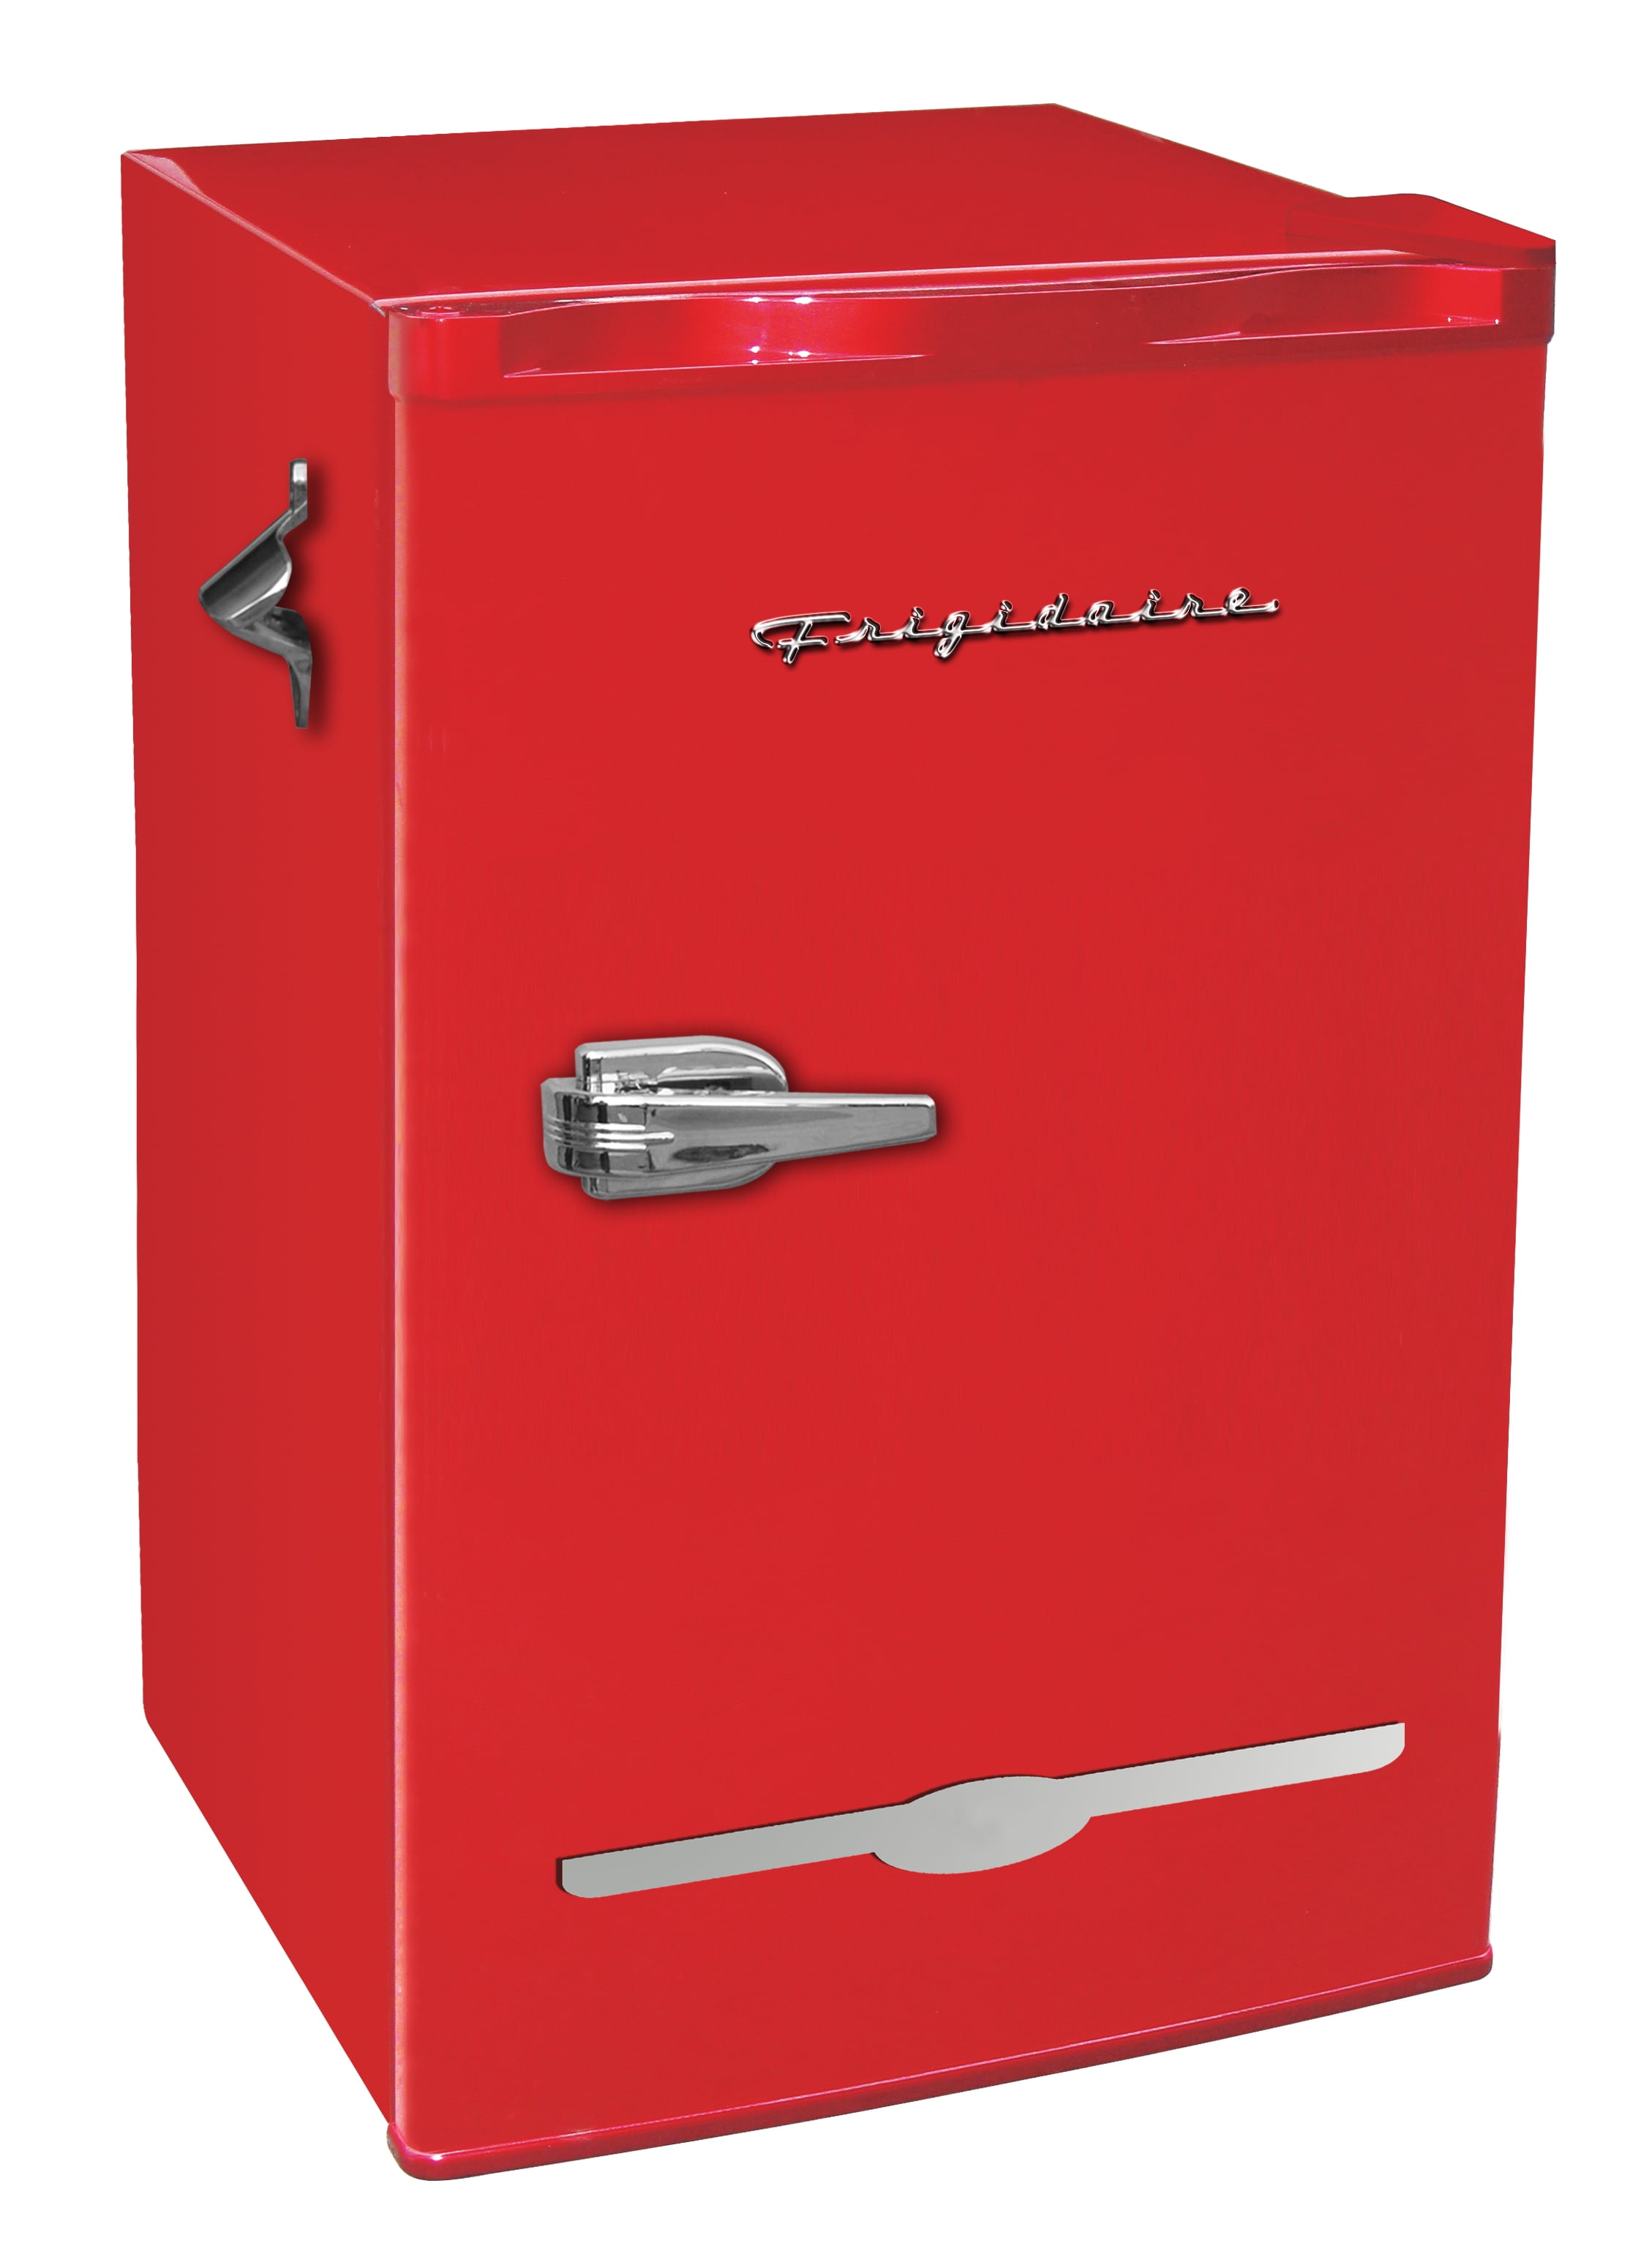 Photo 1 of Frigidaire 3.2 Cu. Ft. Retro Compact Refrigerator with Side Bottle Opener EFR376, Red